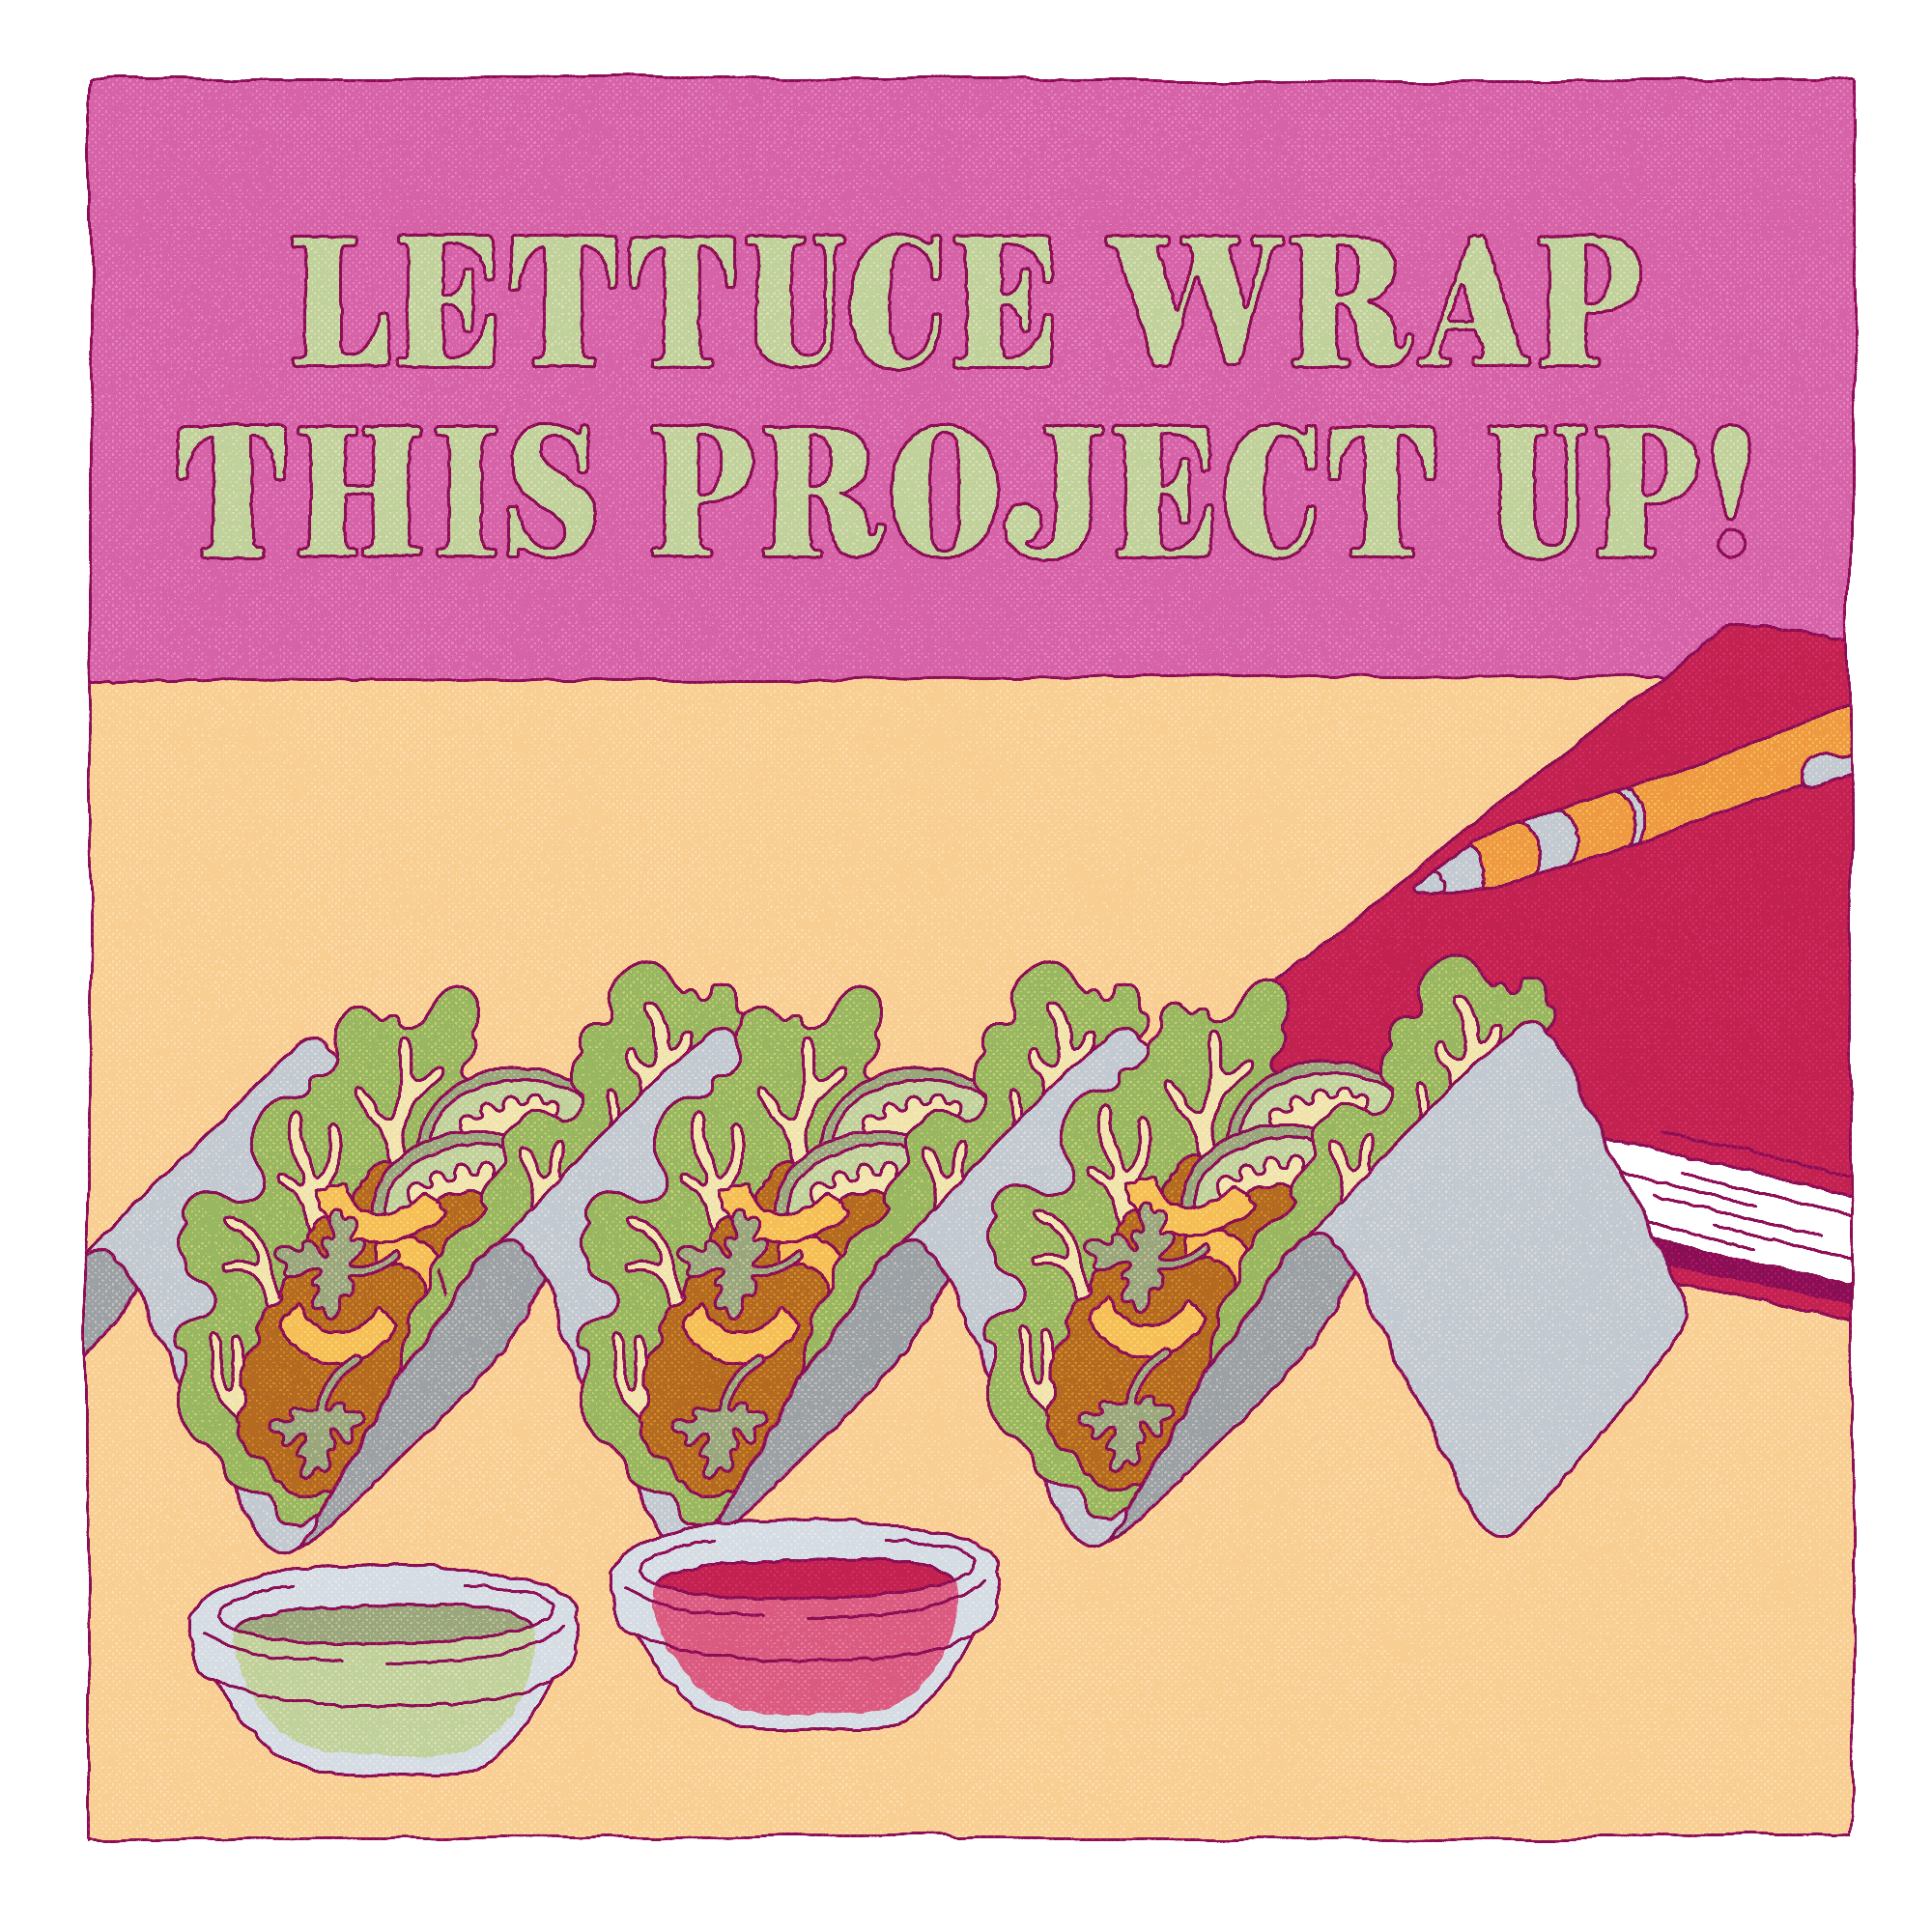 A platter of lettuce wraps with copy reading: &quot;Lettuce wrap this project up!&quot;